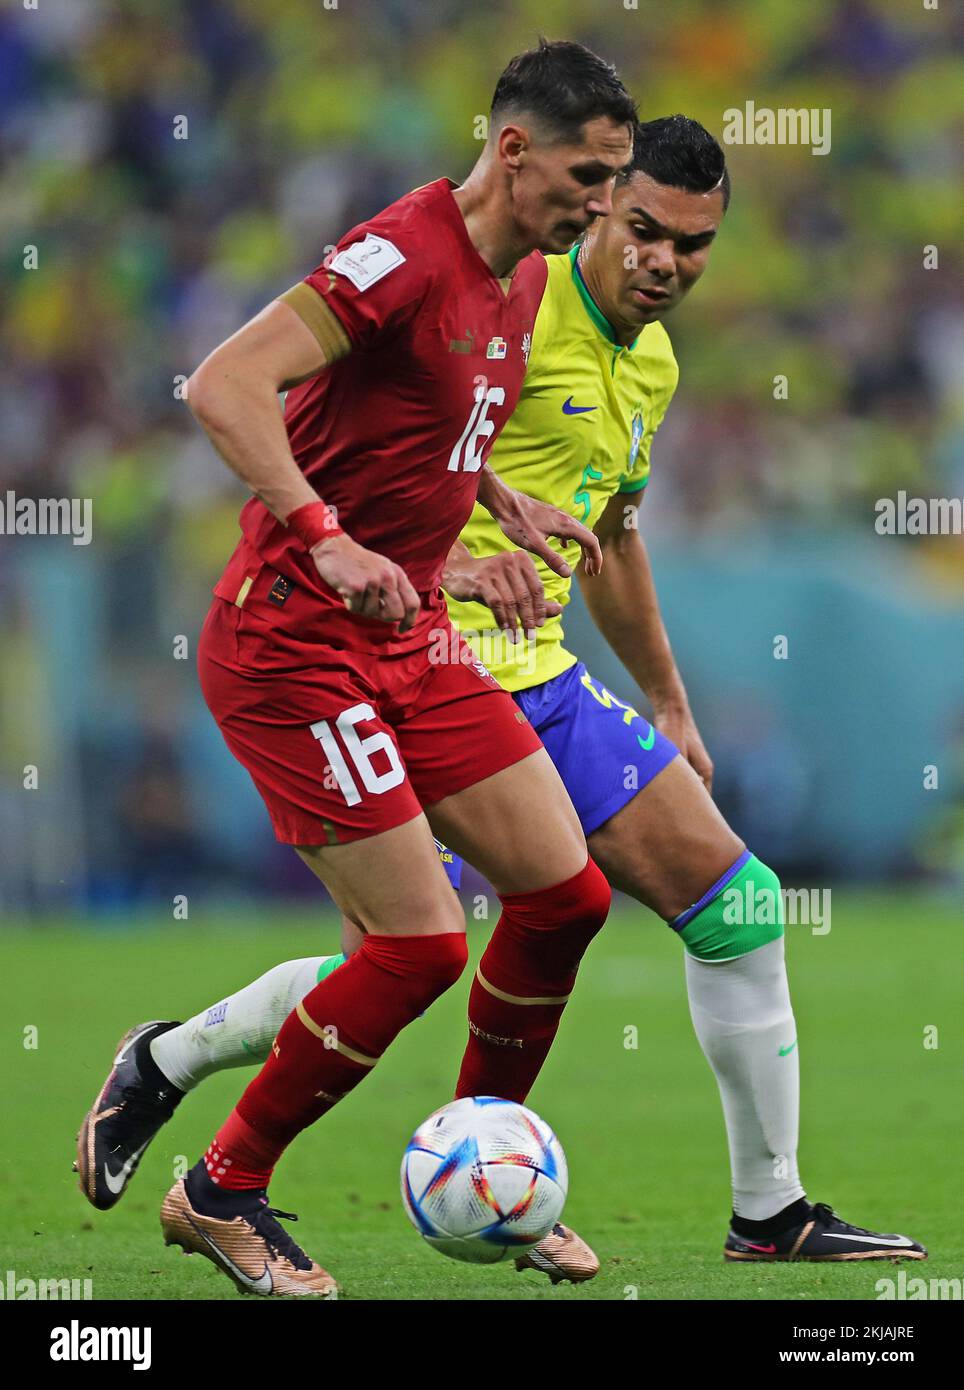 Doha, Qatar. 24th Nov, 2022. Casemiro of Brazil disputes the bid with Sasa Lukic of Serbia, during the match between Brazil and Serbia, for the 1st round of Group G of the FIFA World Cup Qatar 2022, at Lusail Stadium, this Thursday, 24. 30761 (Heuler Andrey/SPP) Credit: SPP Sport Press Photo. /Alamy Live News Stock Photo